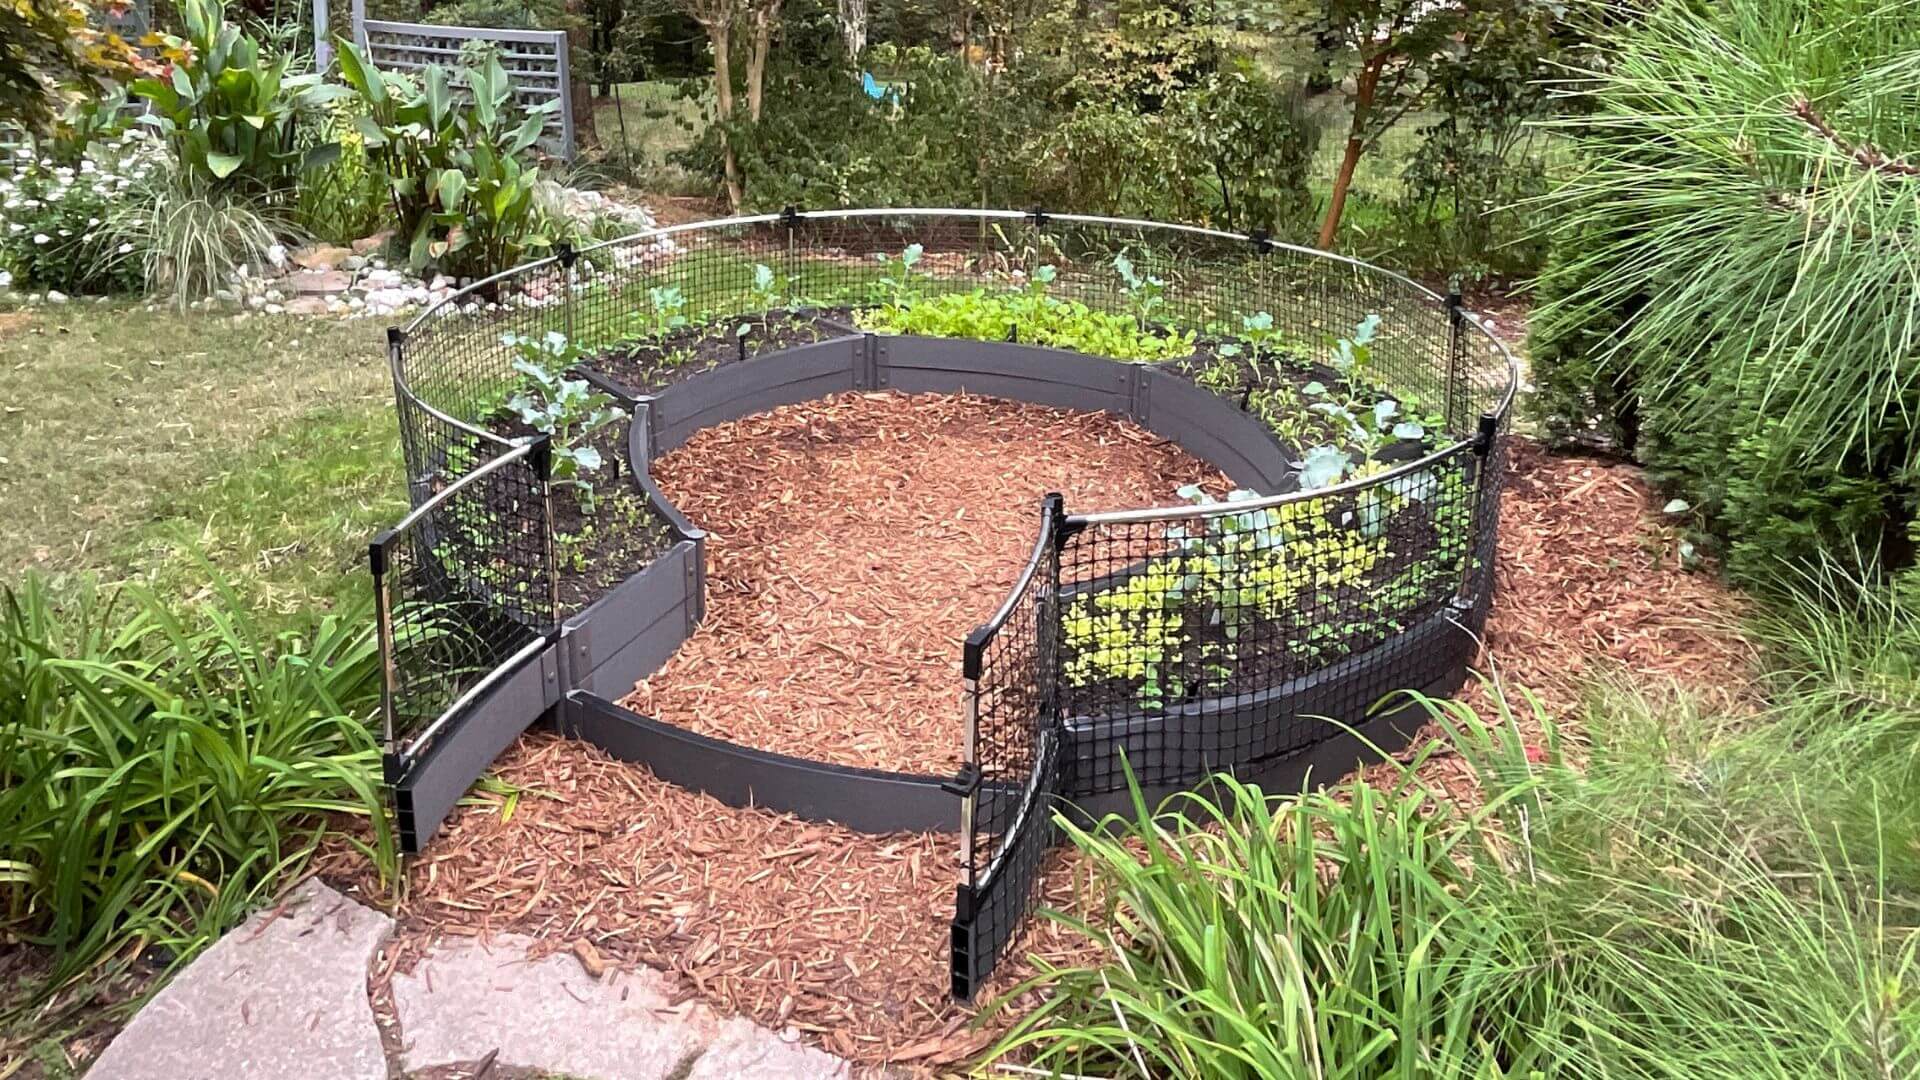 'Roundabout' 10' x 10' Raised Garden Bed Raised Garden Beds Frame It All 